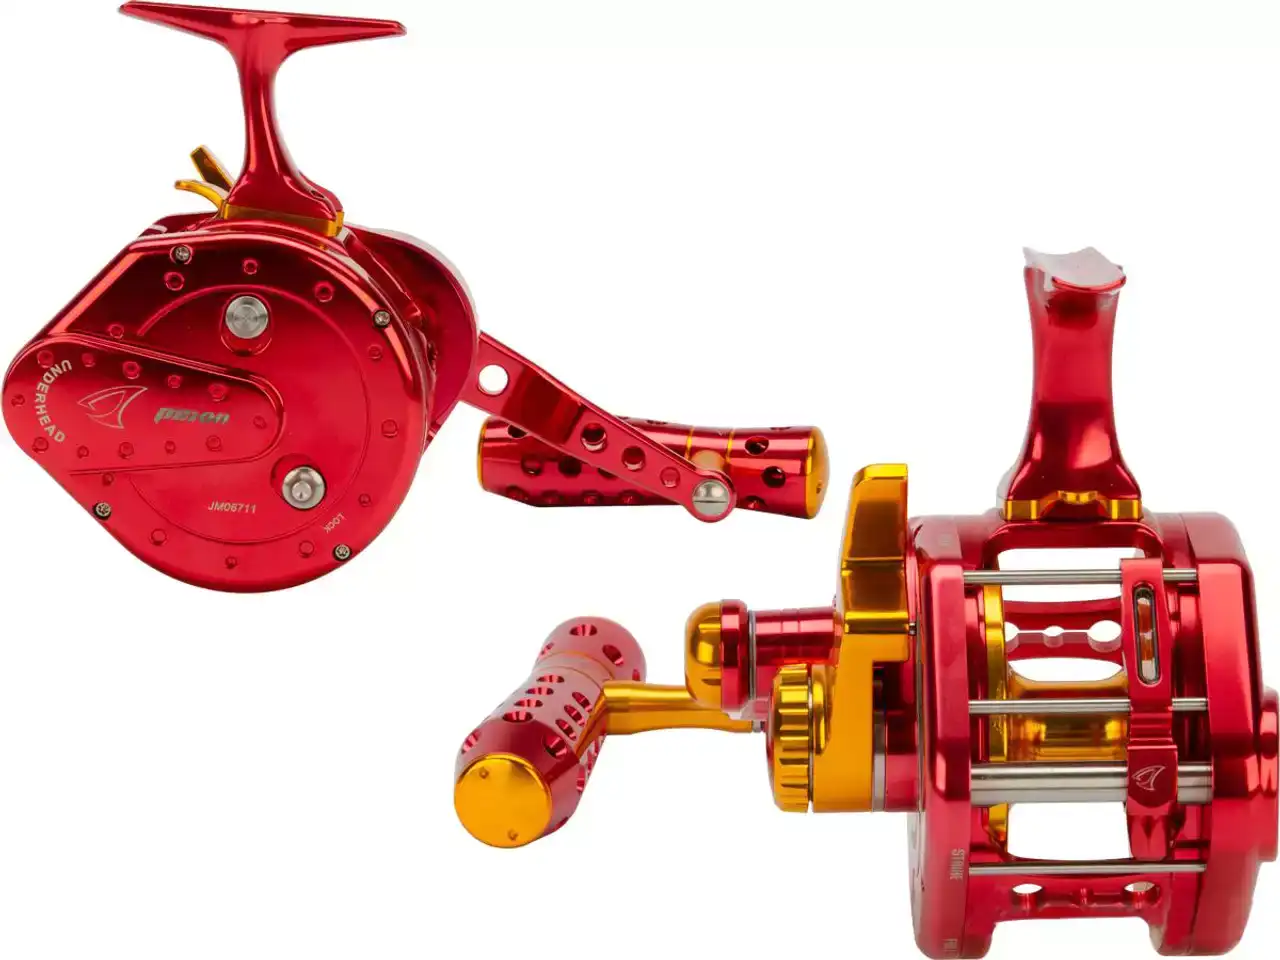 All the people Top Sellers Jigging Master UnderHead Reel - Red / Gold  (Size: PE10N Narrow) at the most competitive price